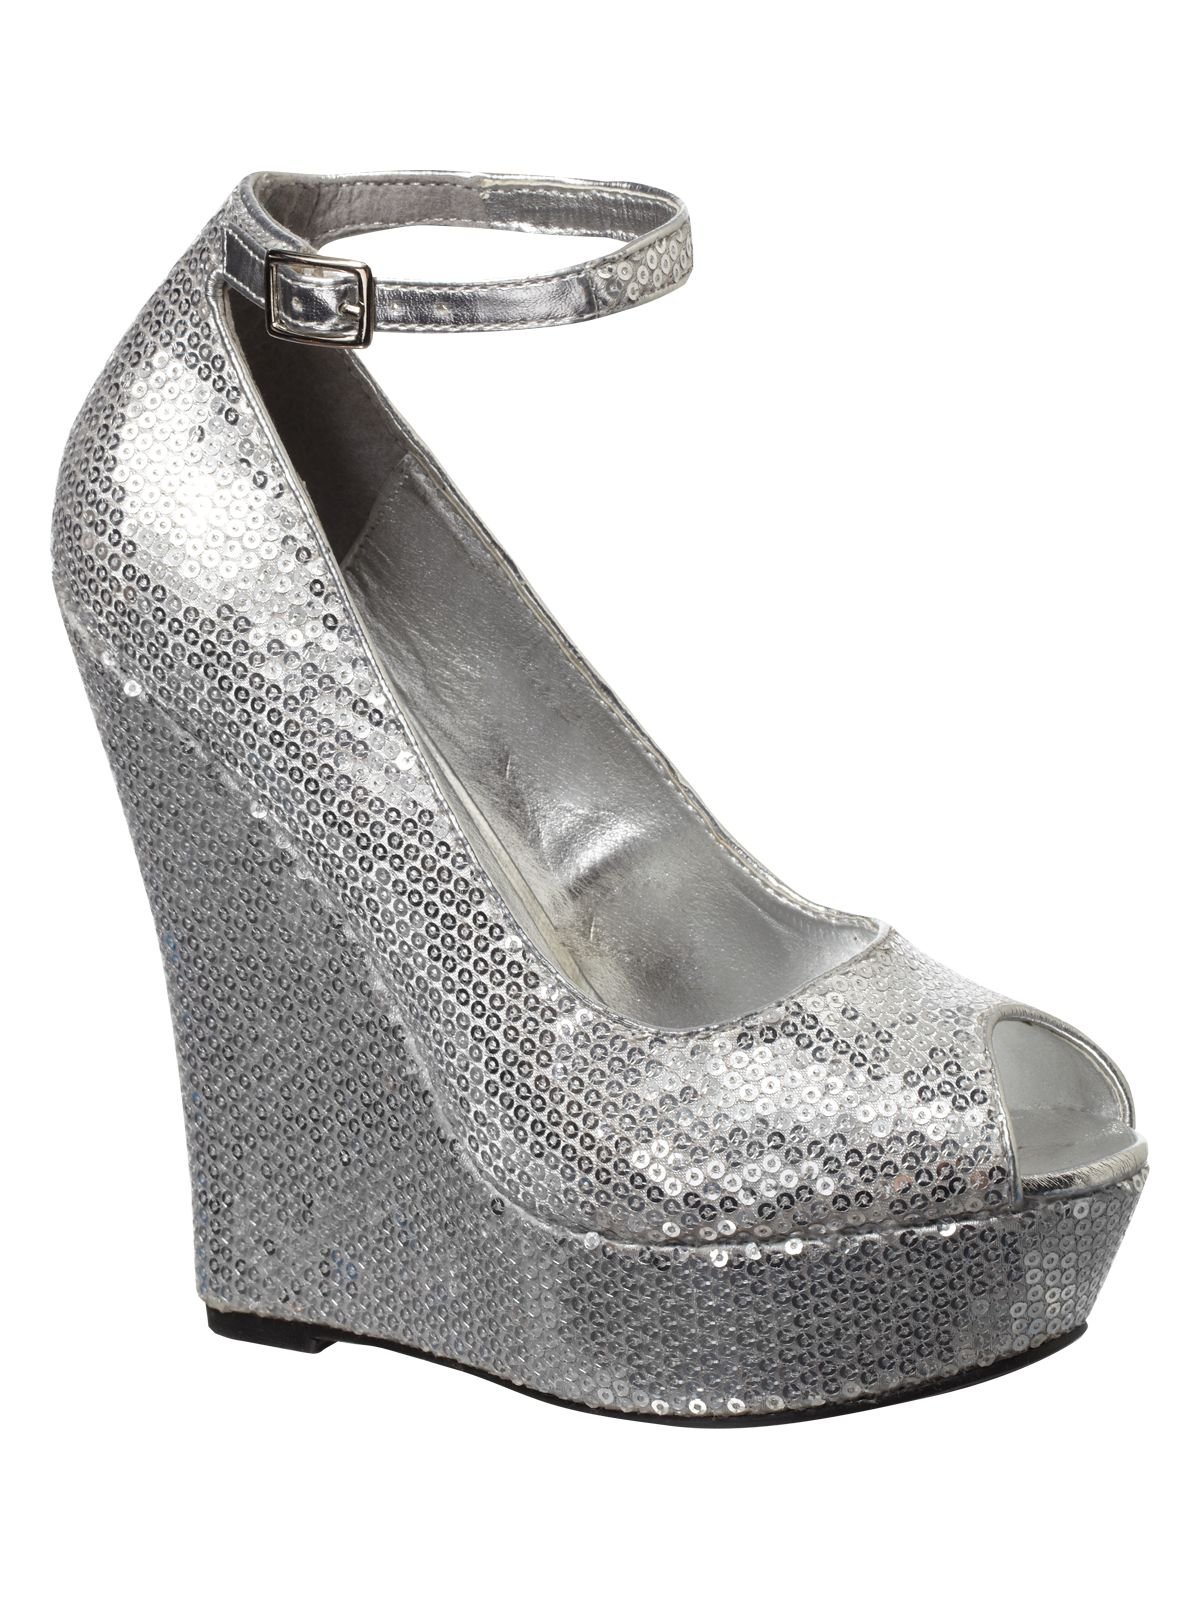 Jane Norman Sequin Wedge in Silver | Lyst